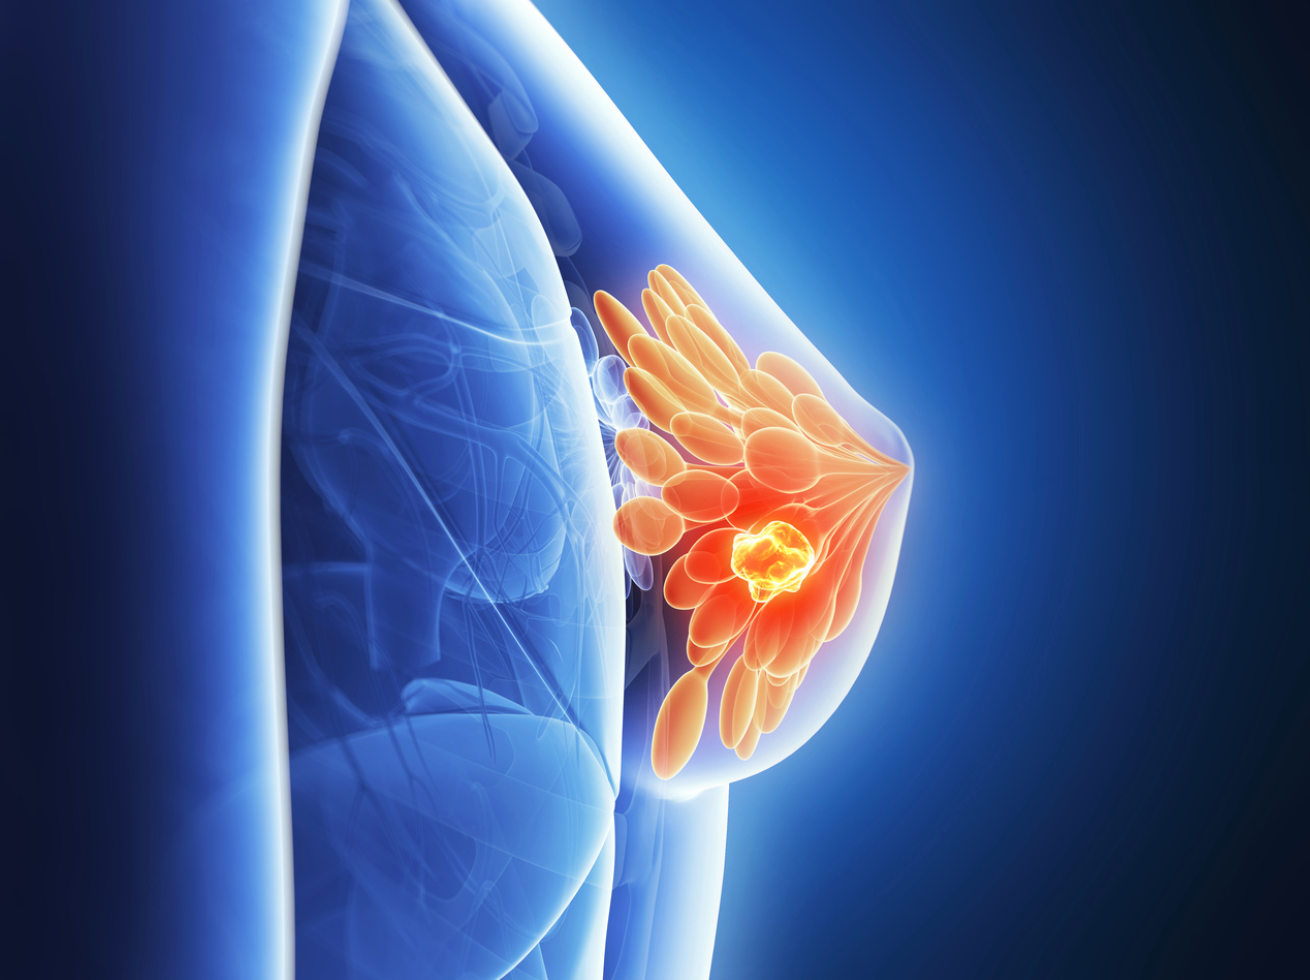 Earlier Mammograms May Not be Necessary for Women With Familial History of Breast Cancer